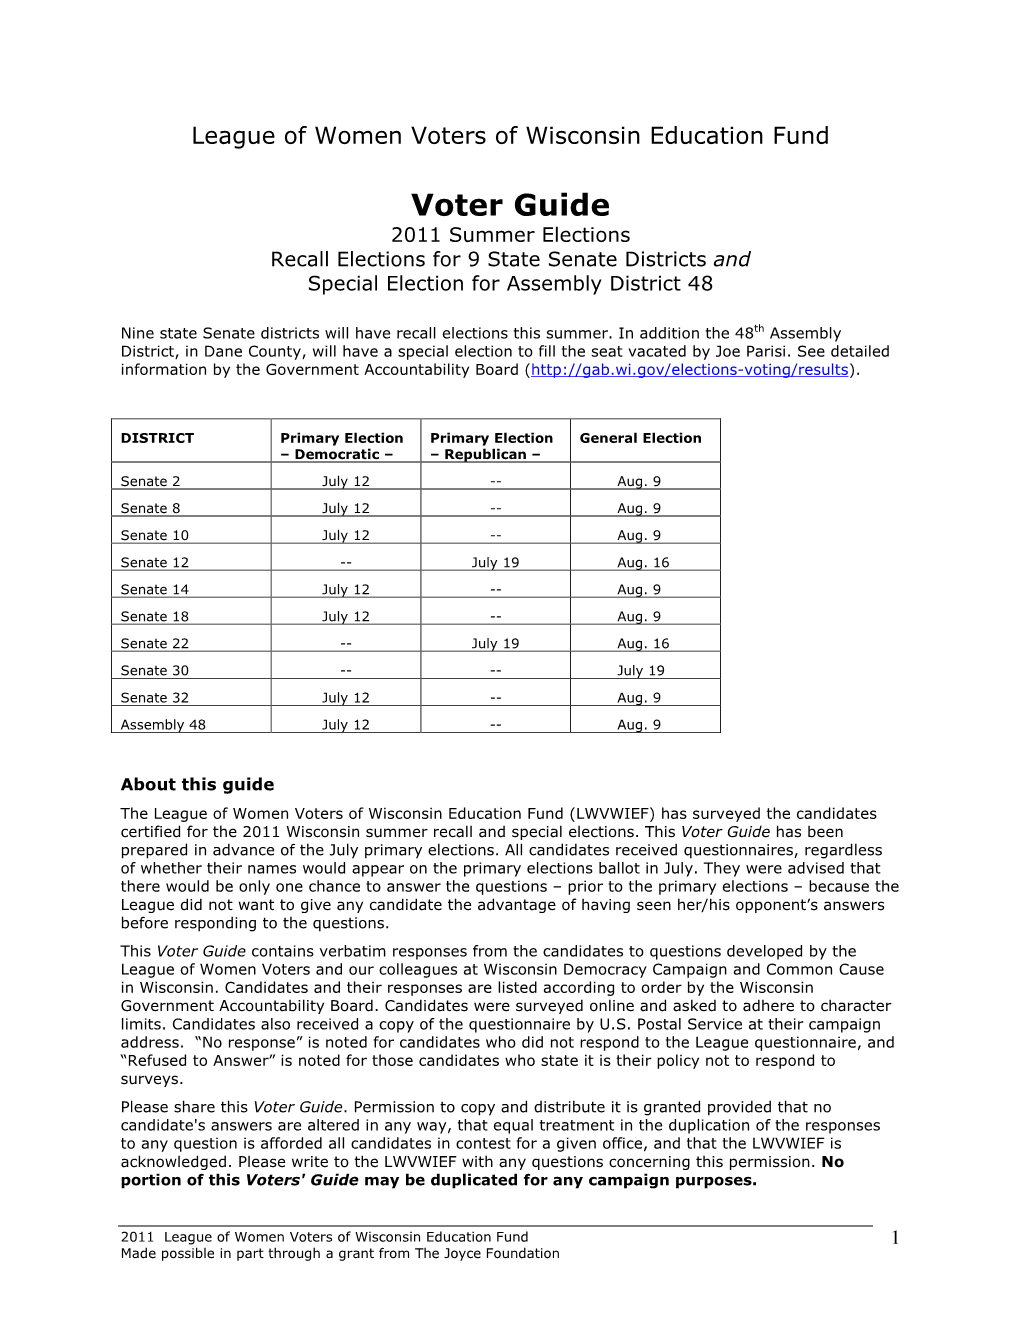 Voter Guide 2011 Summer Elections Recall Elections for 9 State Senate Districts and Special Election for Assembly District 48